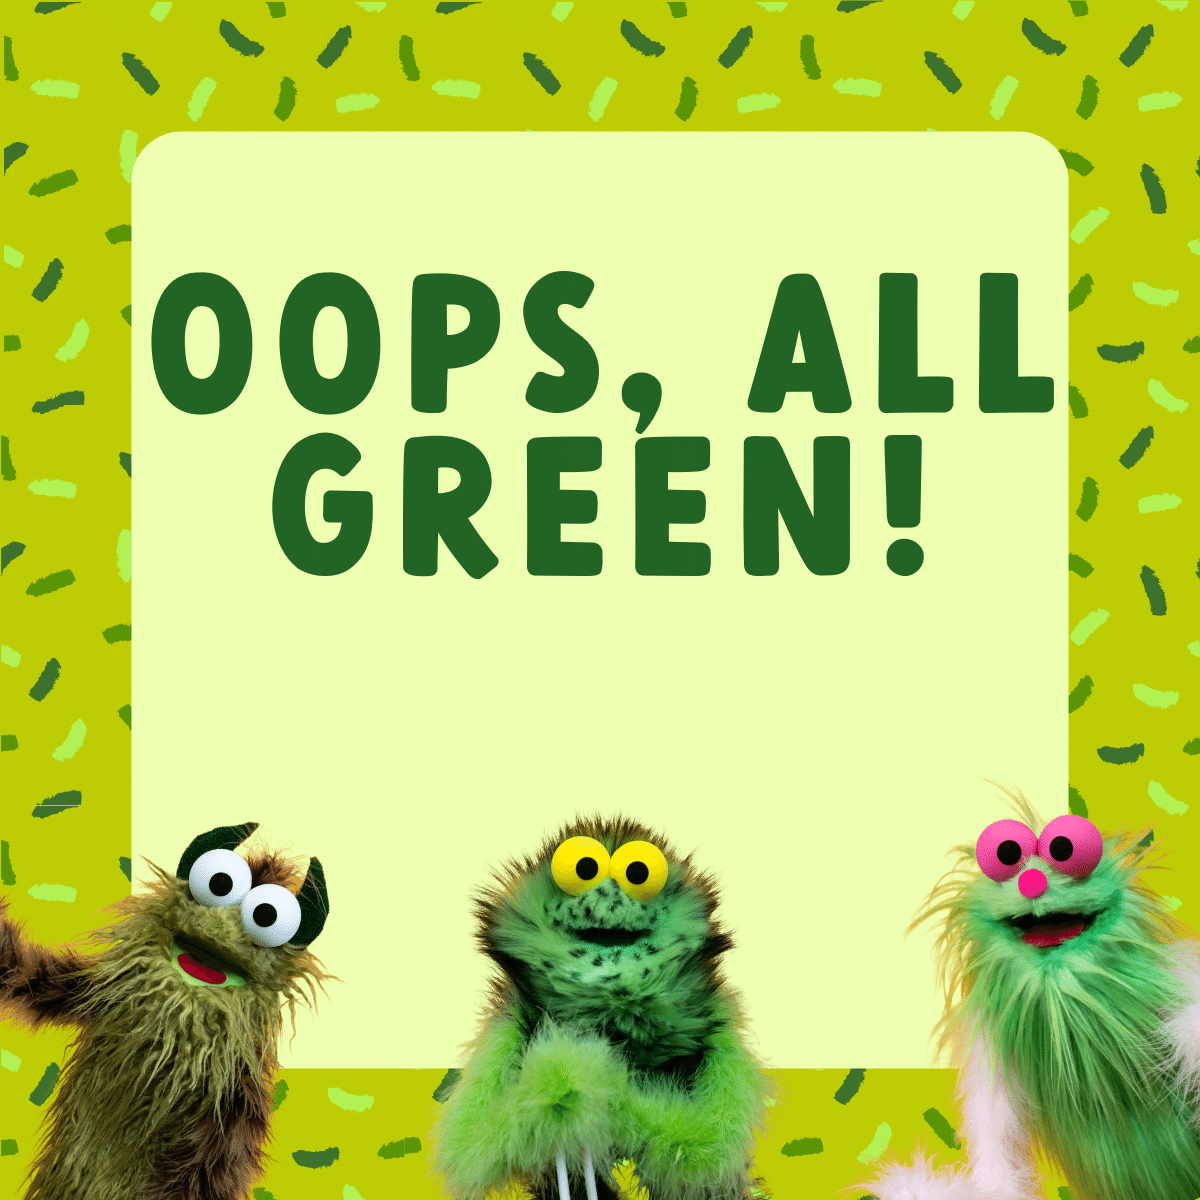 Oops, All Green!